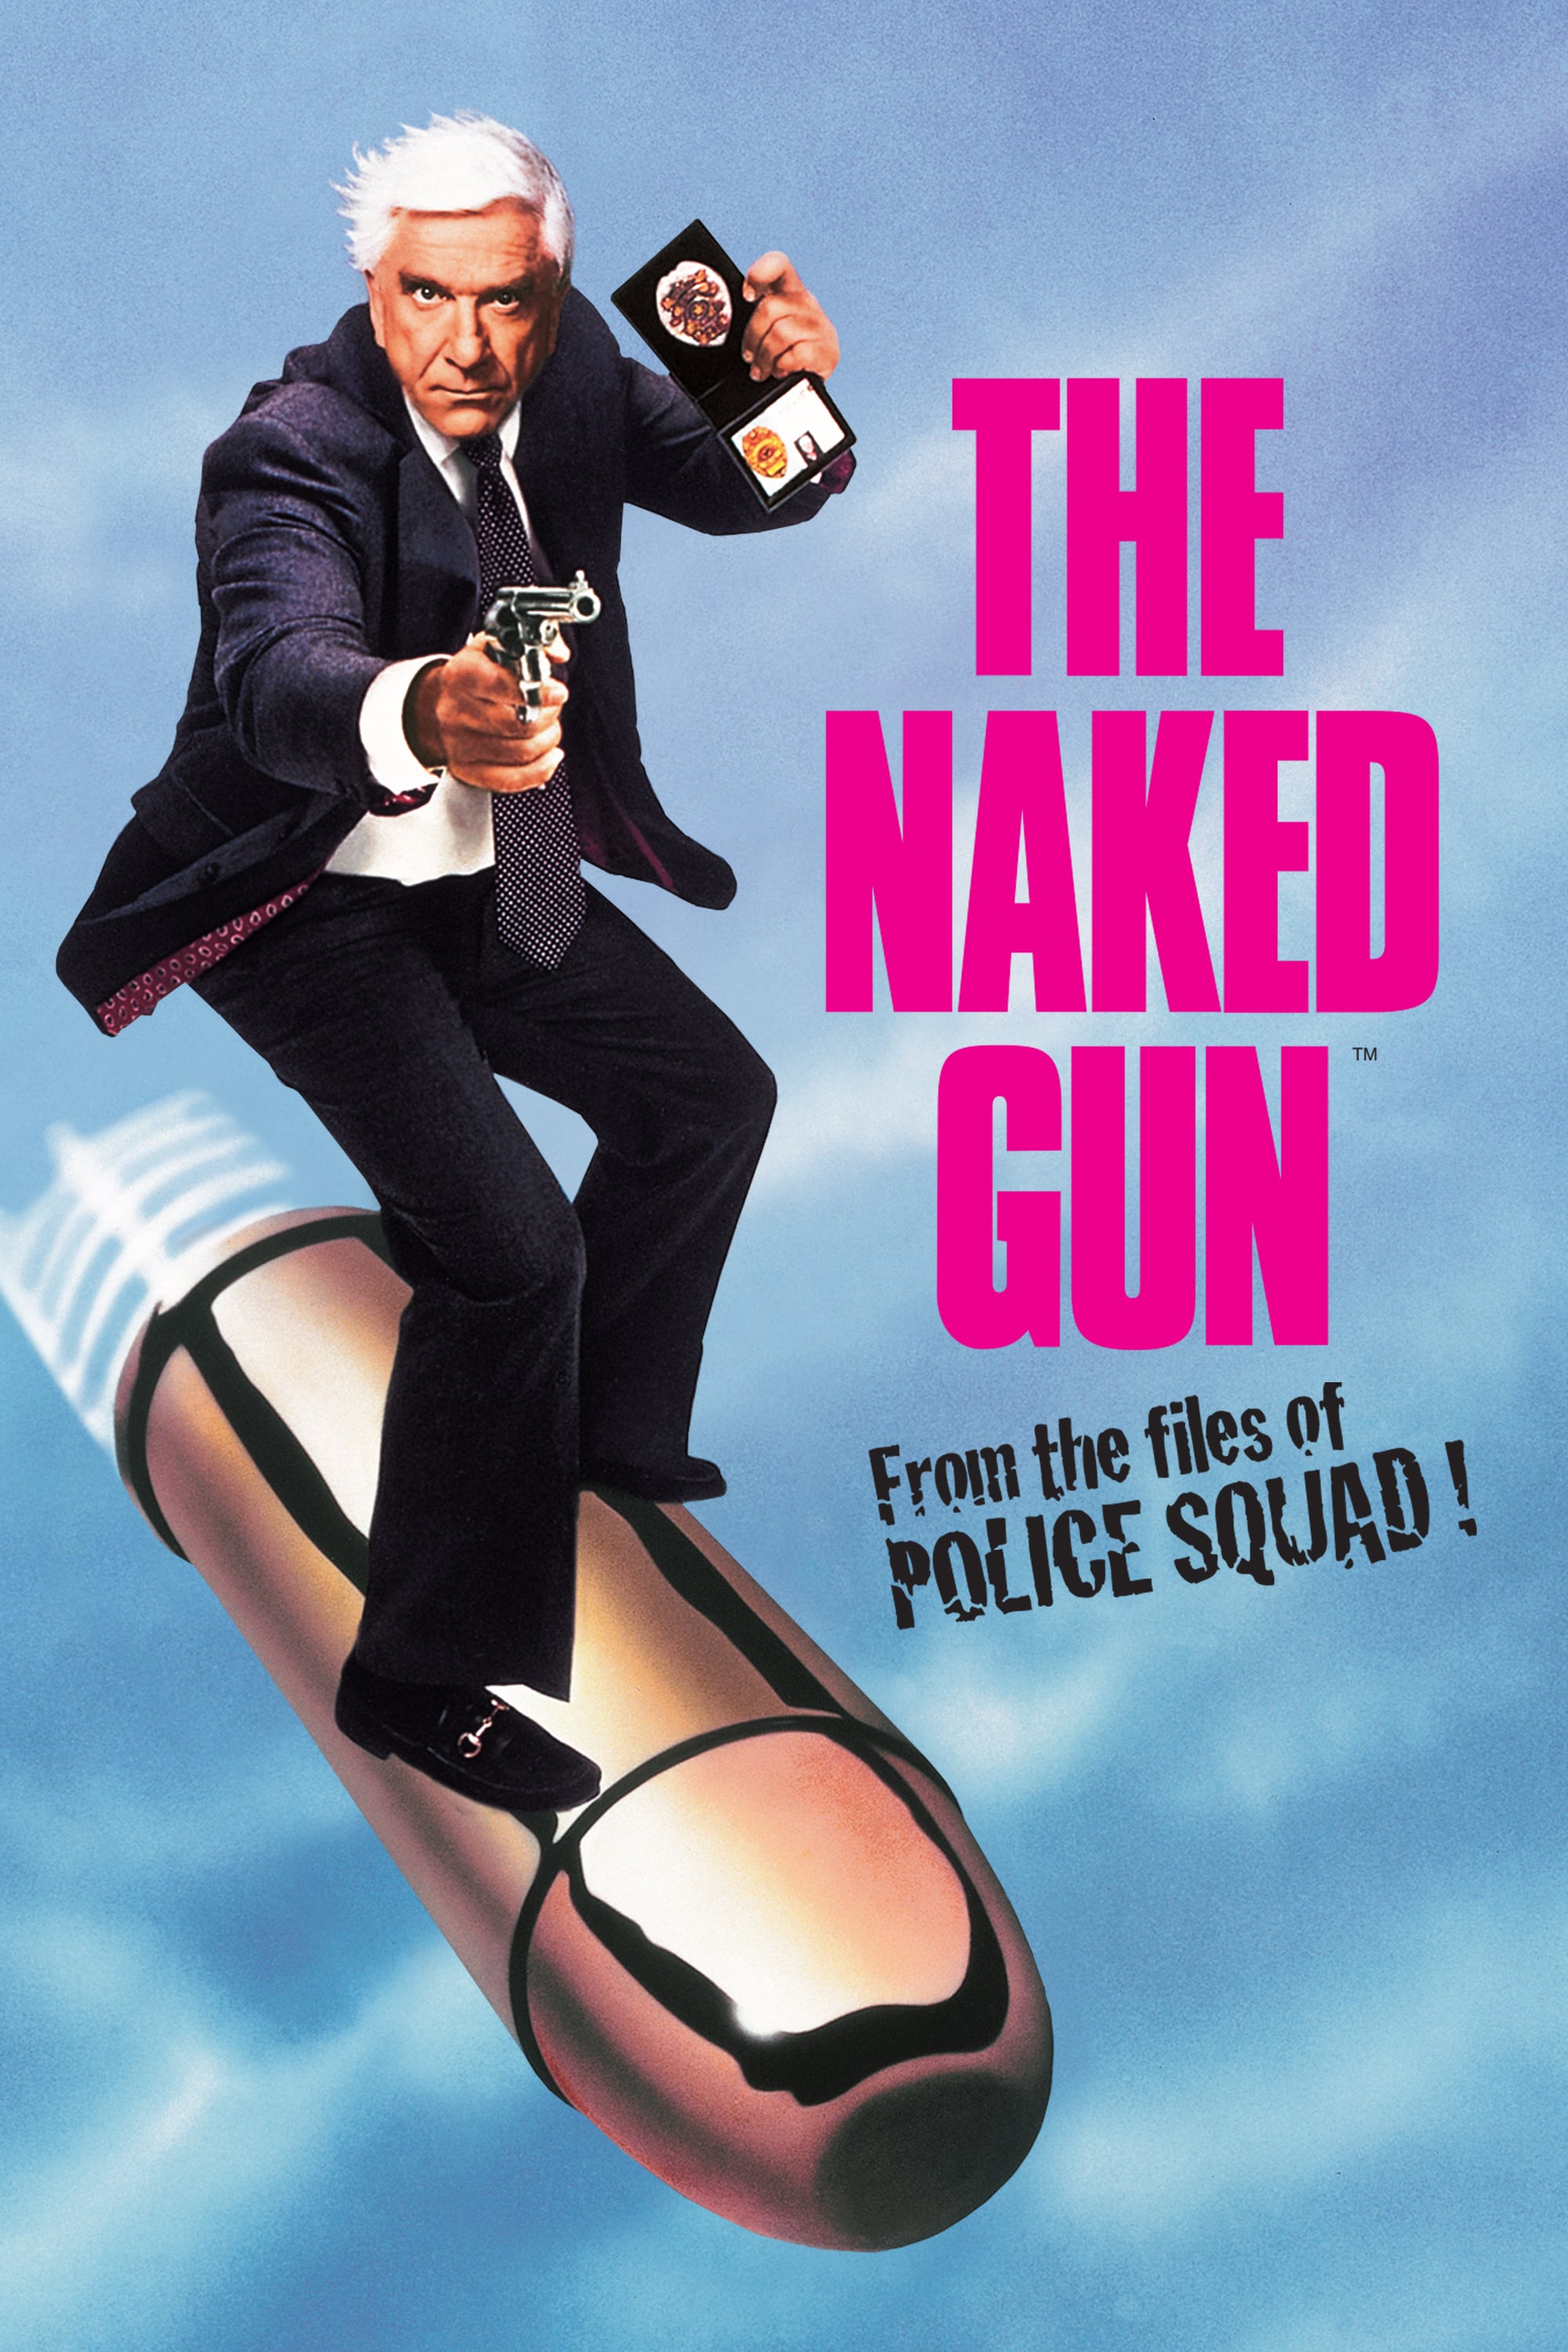 THE NAKED GUN: FROM THE FILES OF POLICE SQUAD